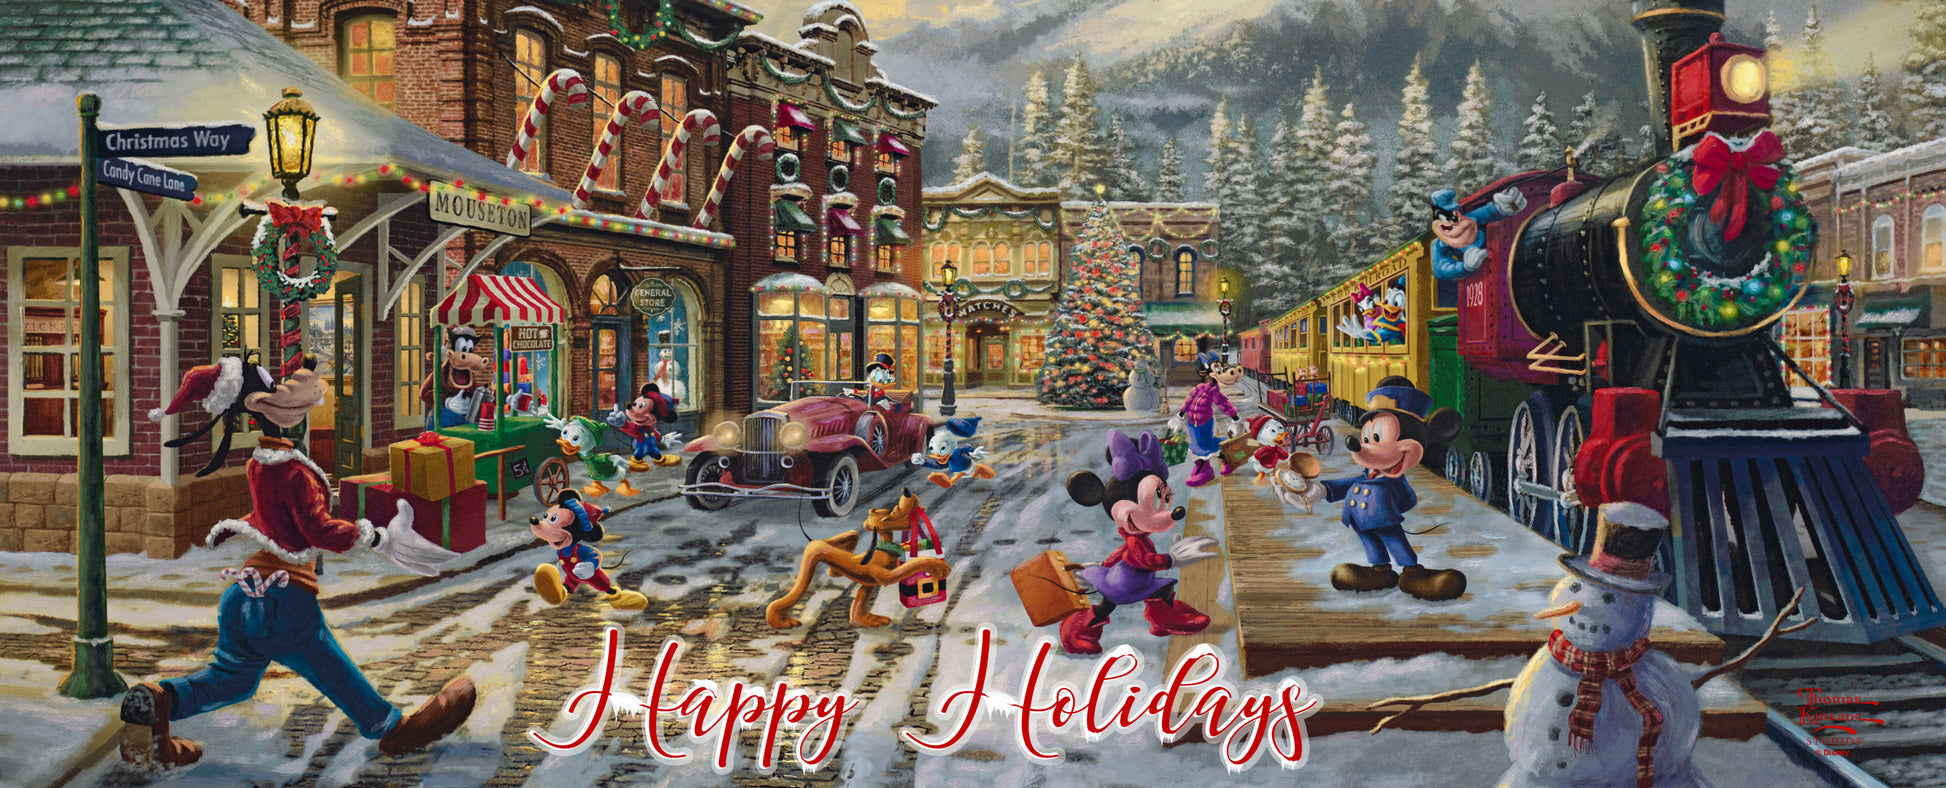 161402_WDS Disney - Mickey and Minnie Candy Cane Express 12X18 Wood Sign.jpg